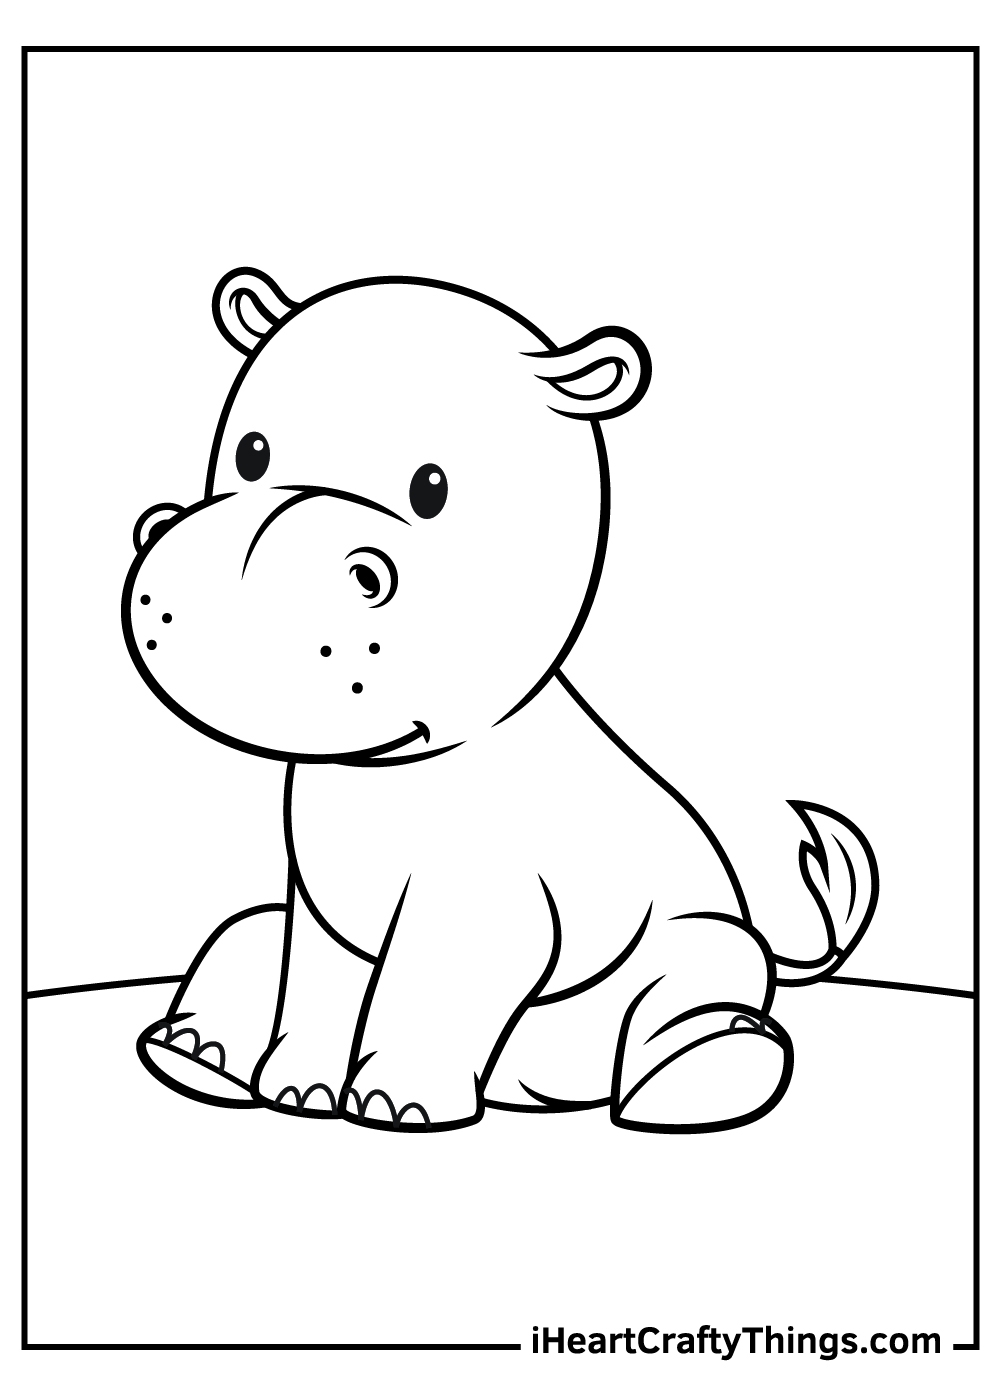 Baby Animals Coloring Pages 100 Free Printables - Free Printable Animal Coloring Pages